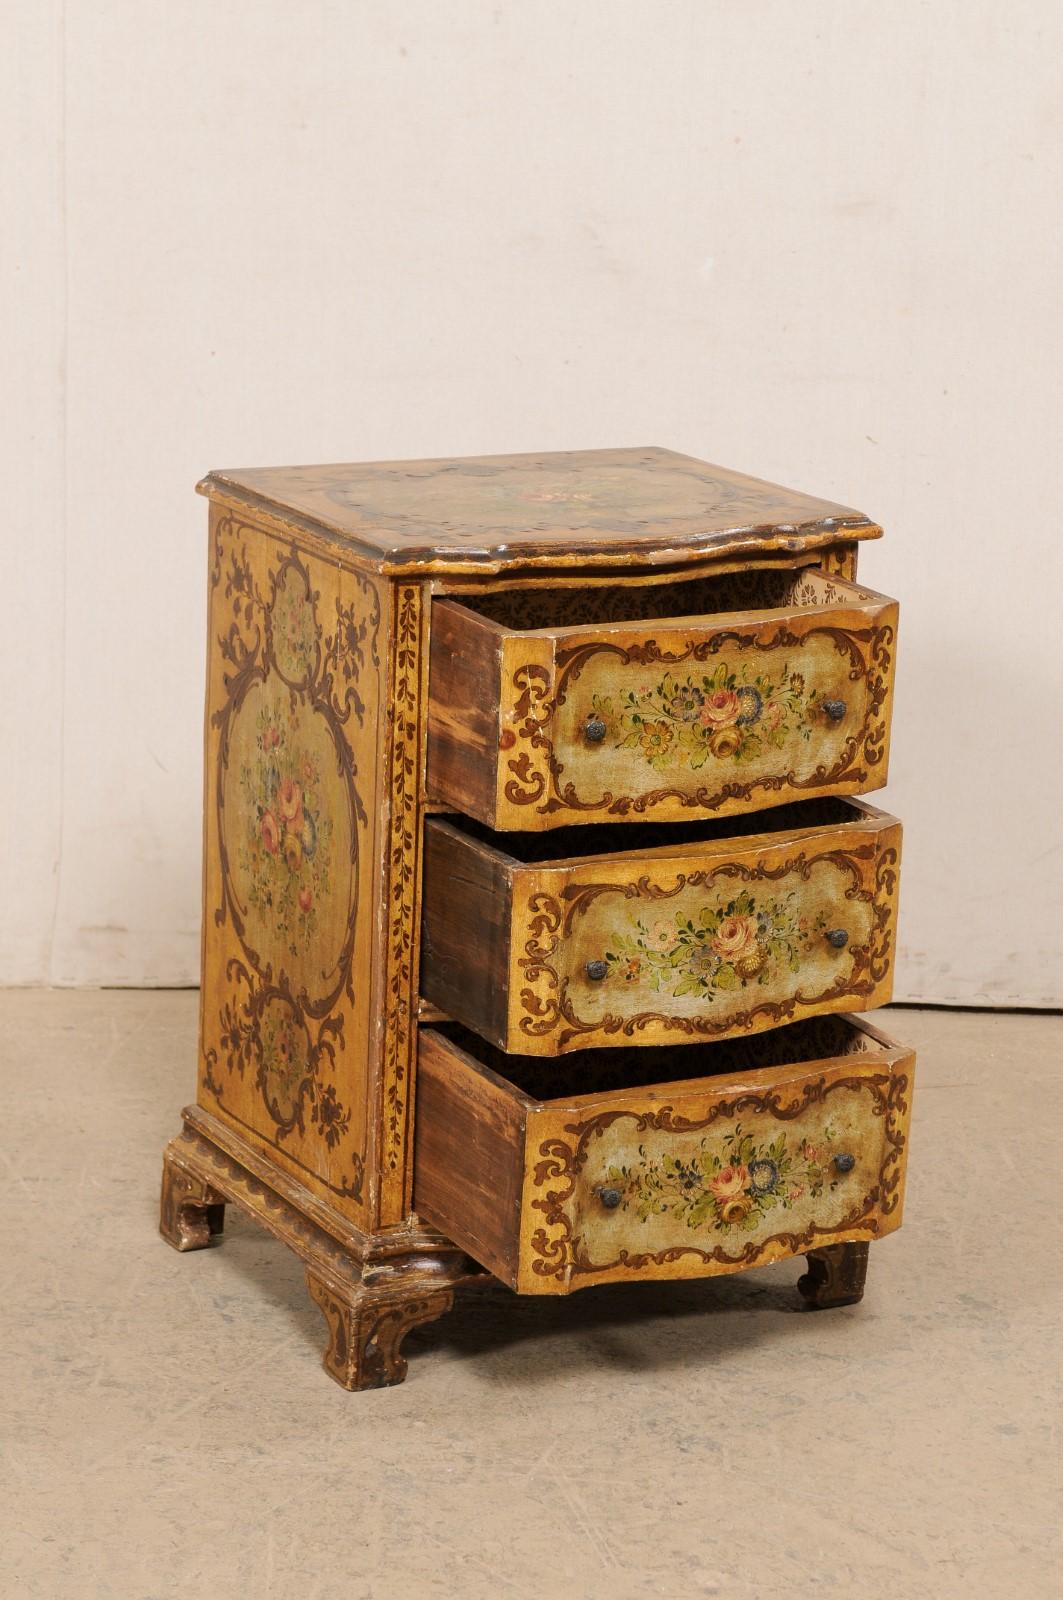 Italian 19th C. Petite Serpentine Chest with Hand-Painted Floral Embellishments For Sale 2